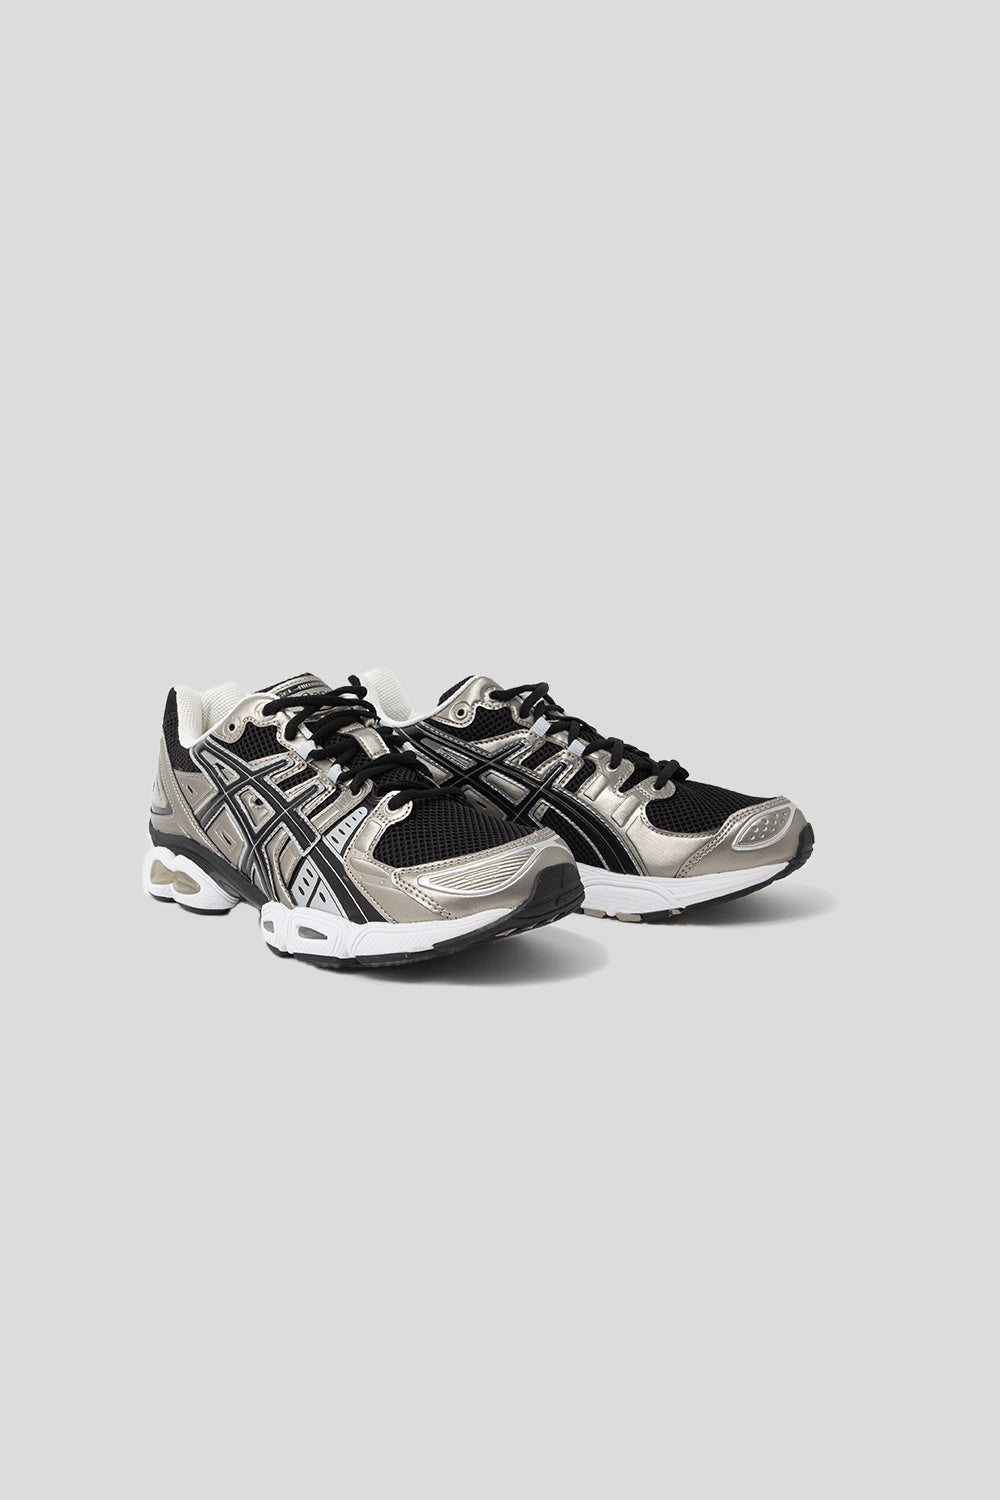 Asics Gel-Nimbus 9 in Frosted Almond / Black | Wallace Mercantile Shop